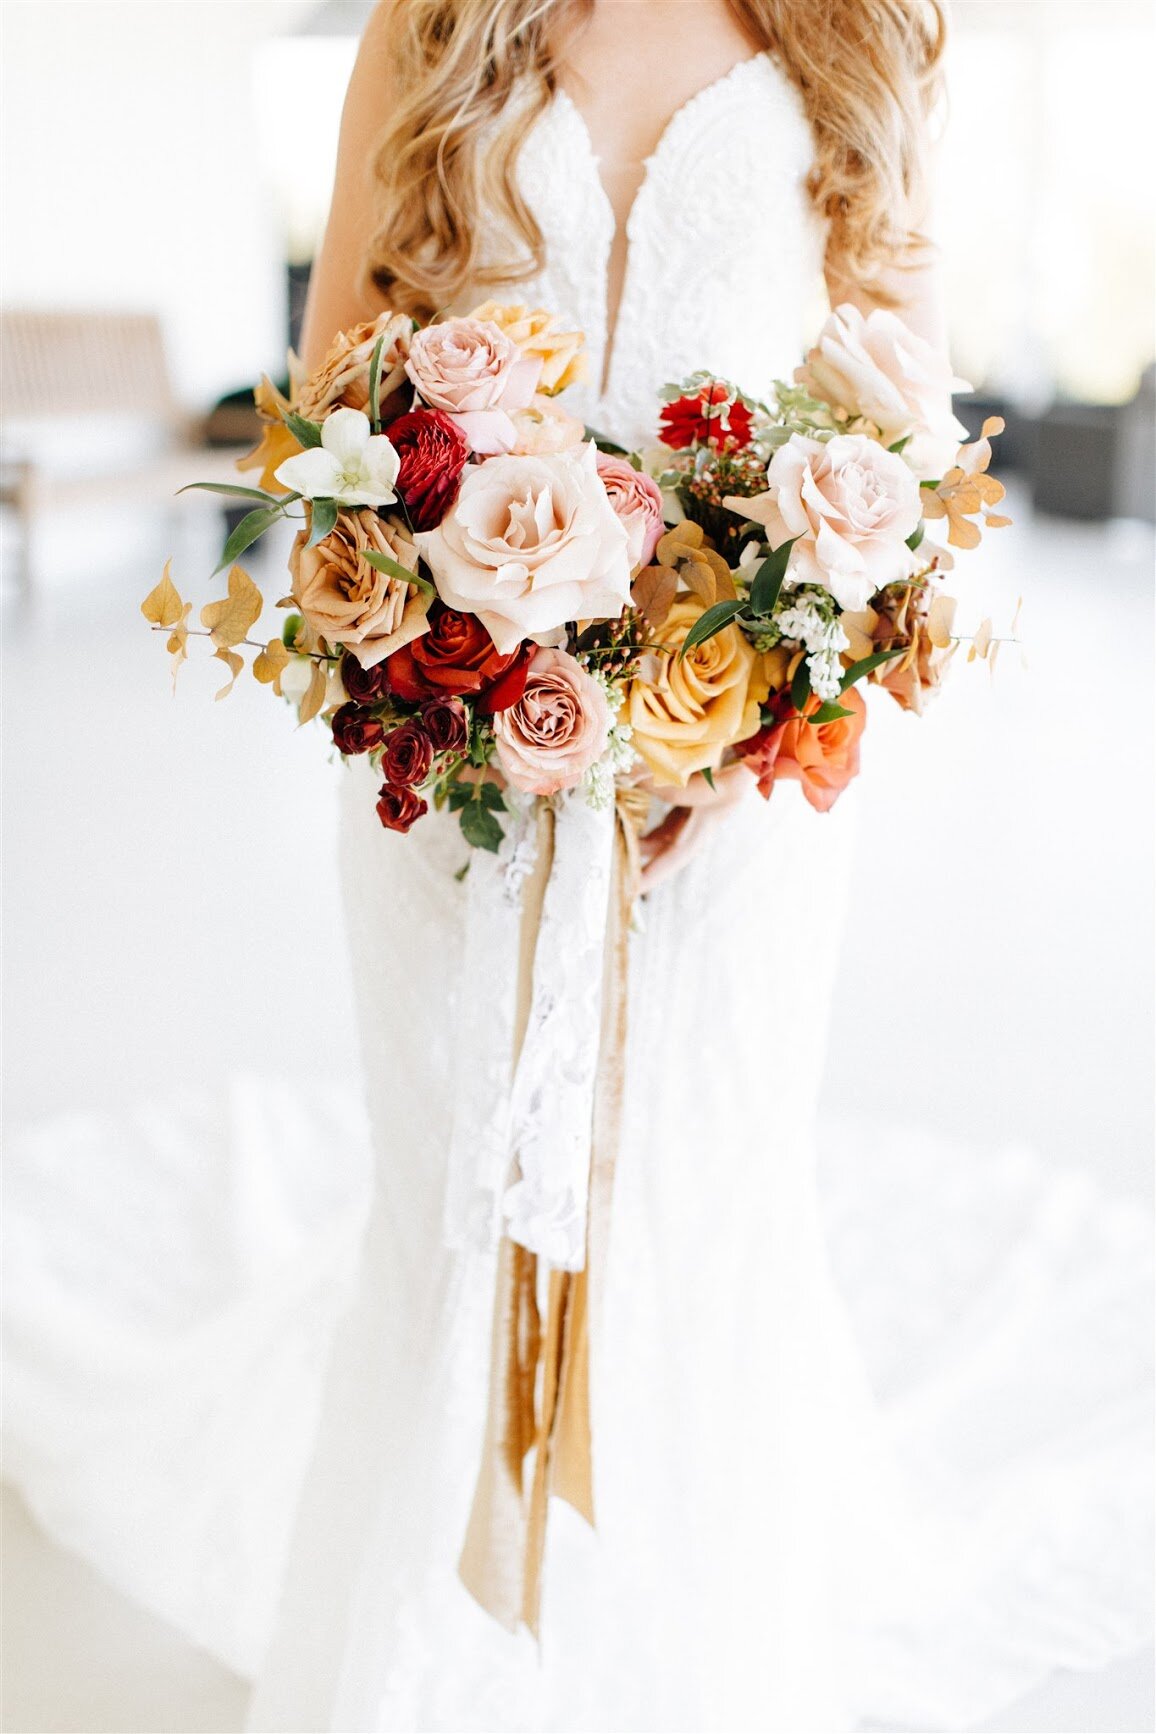 Honey Golden, Bright Red, Pink and Blush Wedding Flowers for a Cheerful Winter Wedding in Texas — The Farmer &amp; I Flower Co.